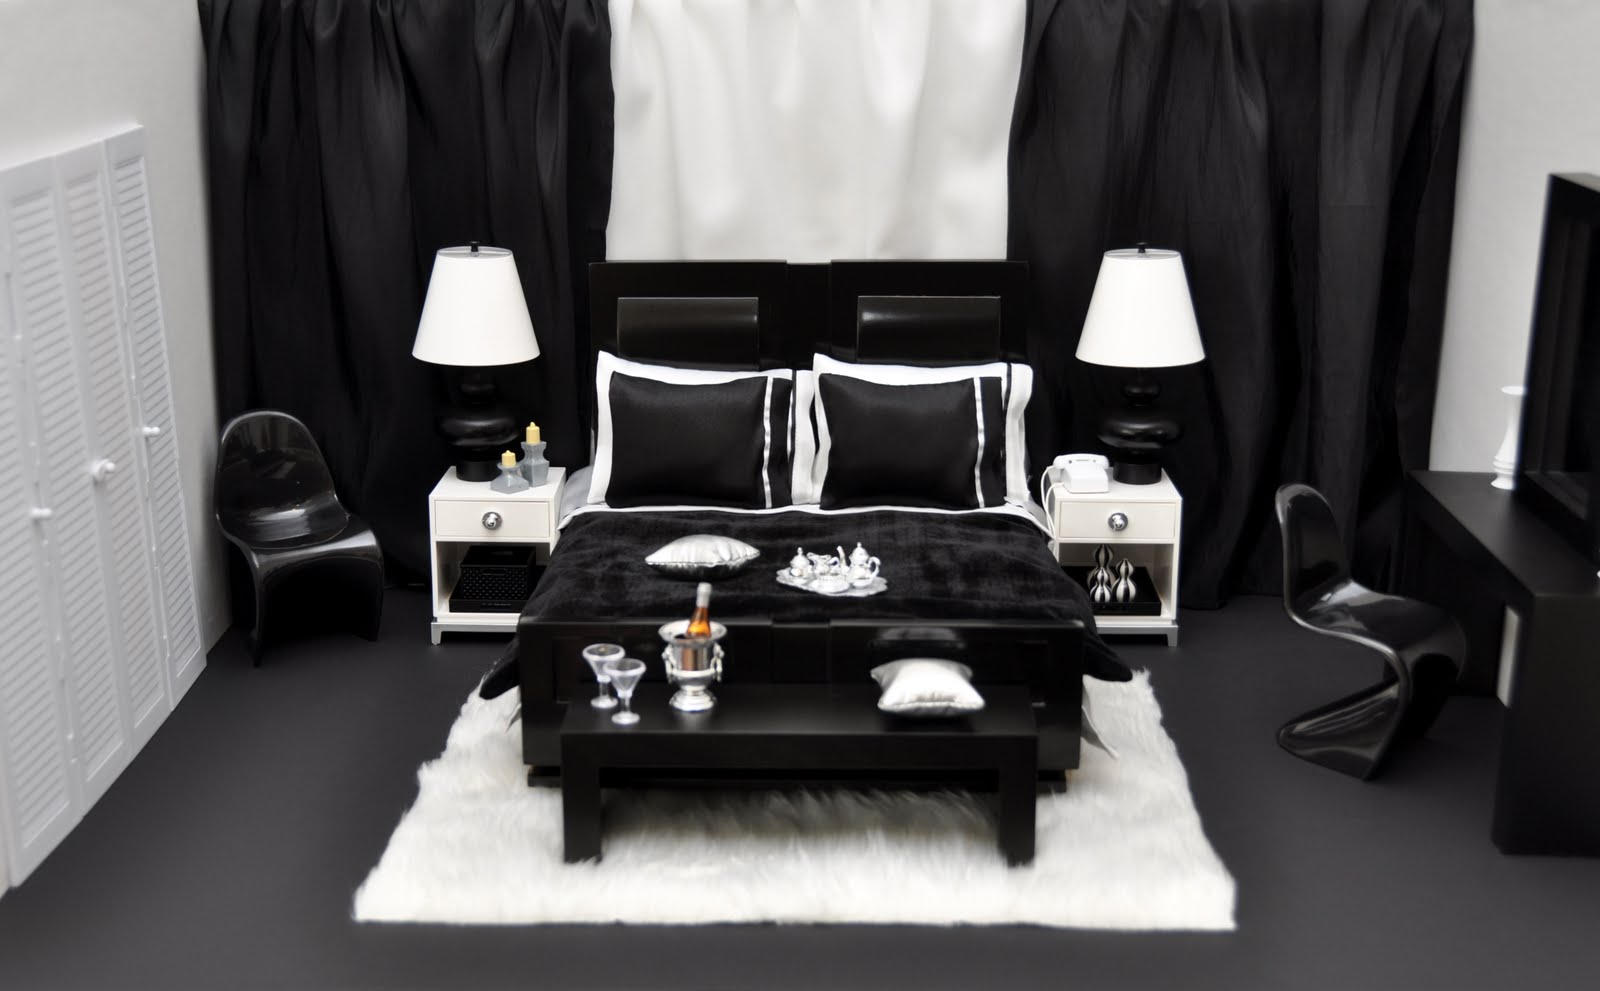 Black White With Elegant Black White Bedroom Decor With Twin Table Lamp Fixtures And Small Bedside Table With Drawers Bedroom 23 Marvelous Black And White Bedroom Design Full Of Personality